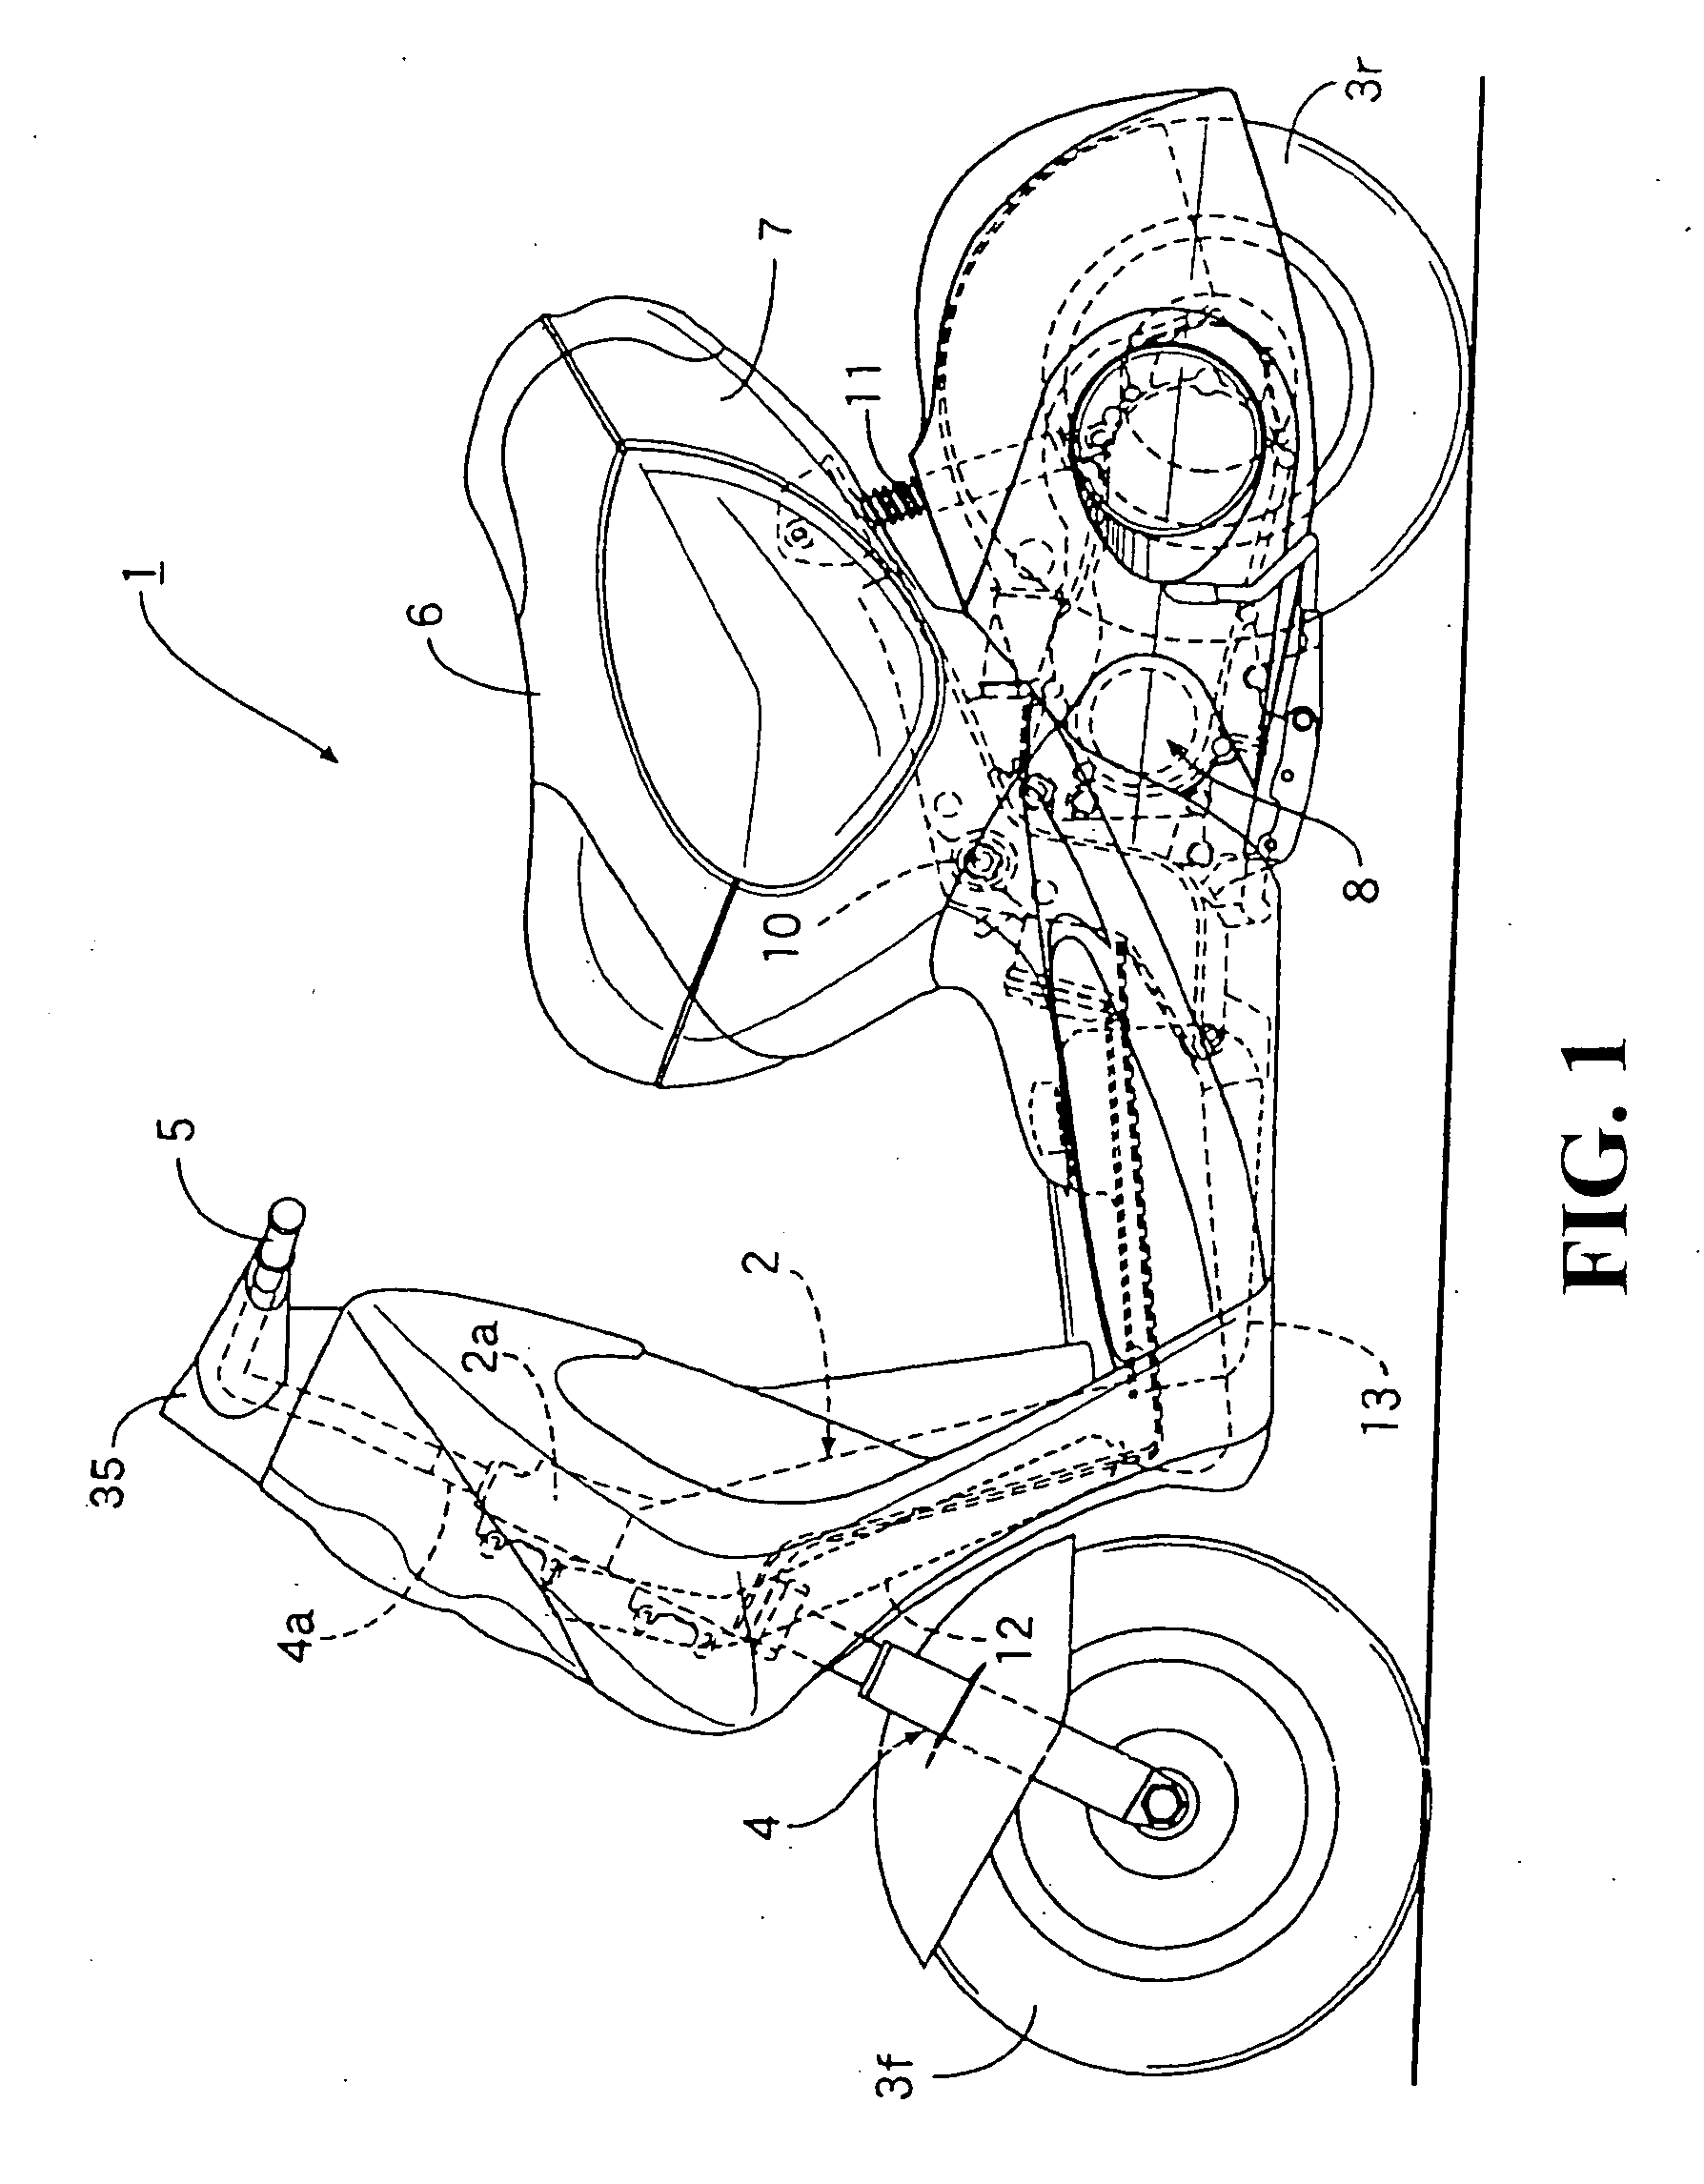 Control mechanism and display for hybrid vehicle